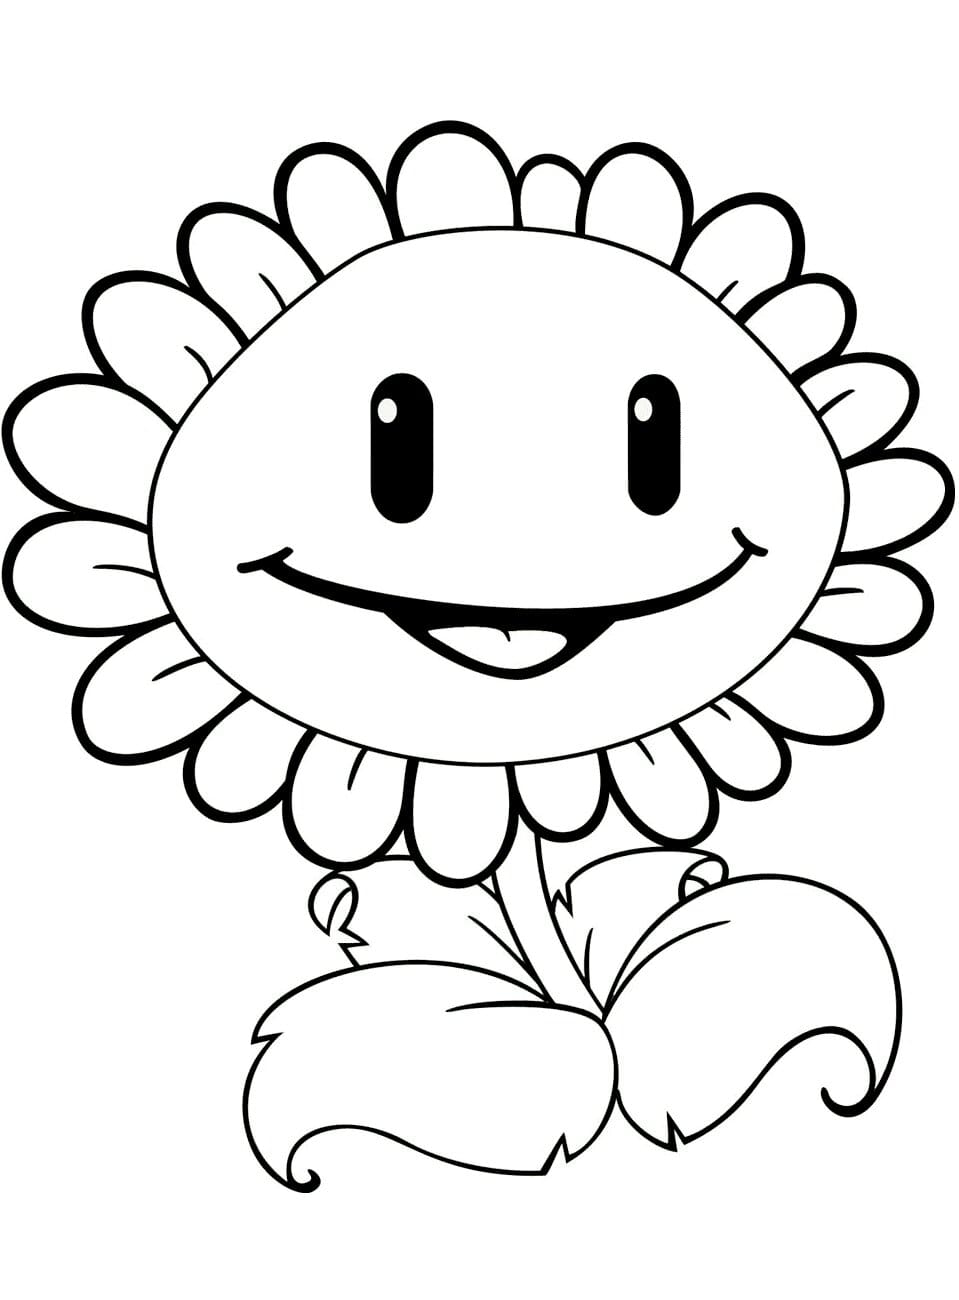 A Little Sunflower Coloring Pages